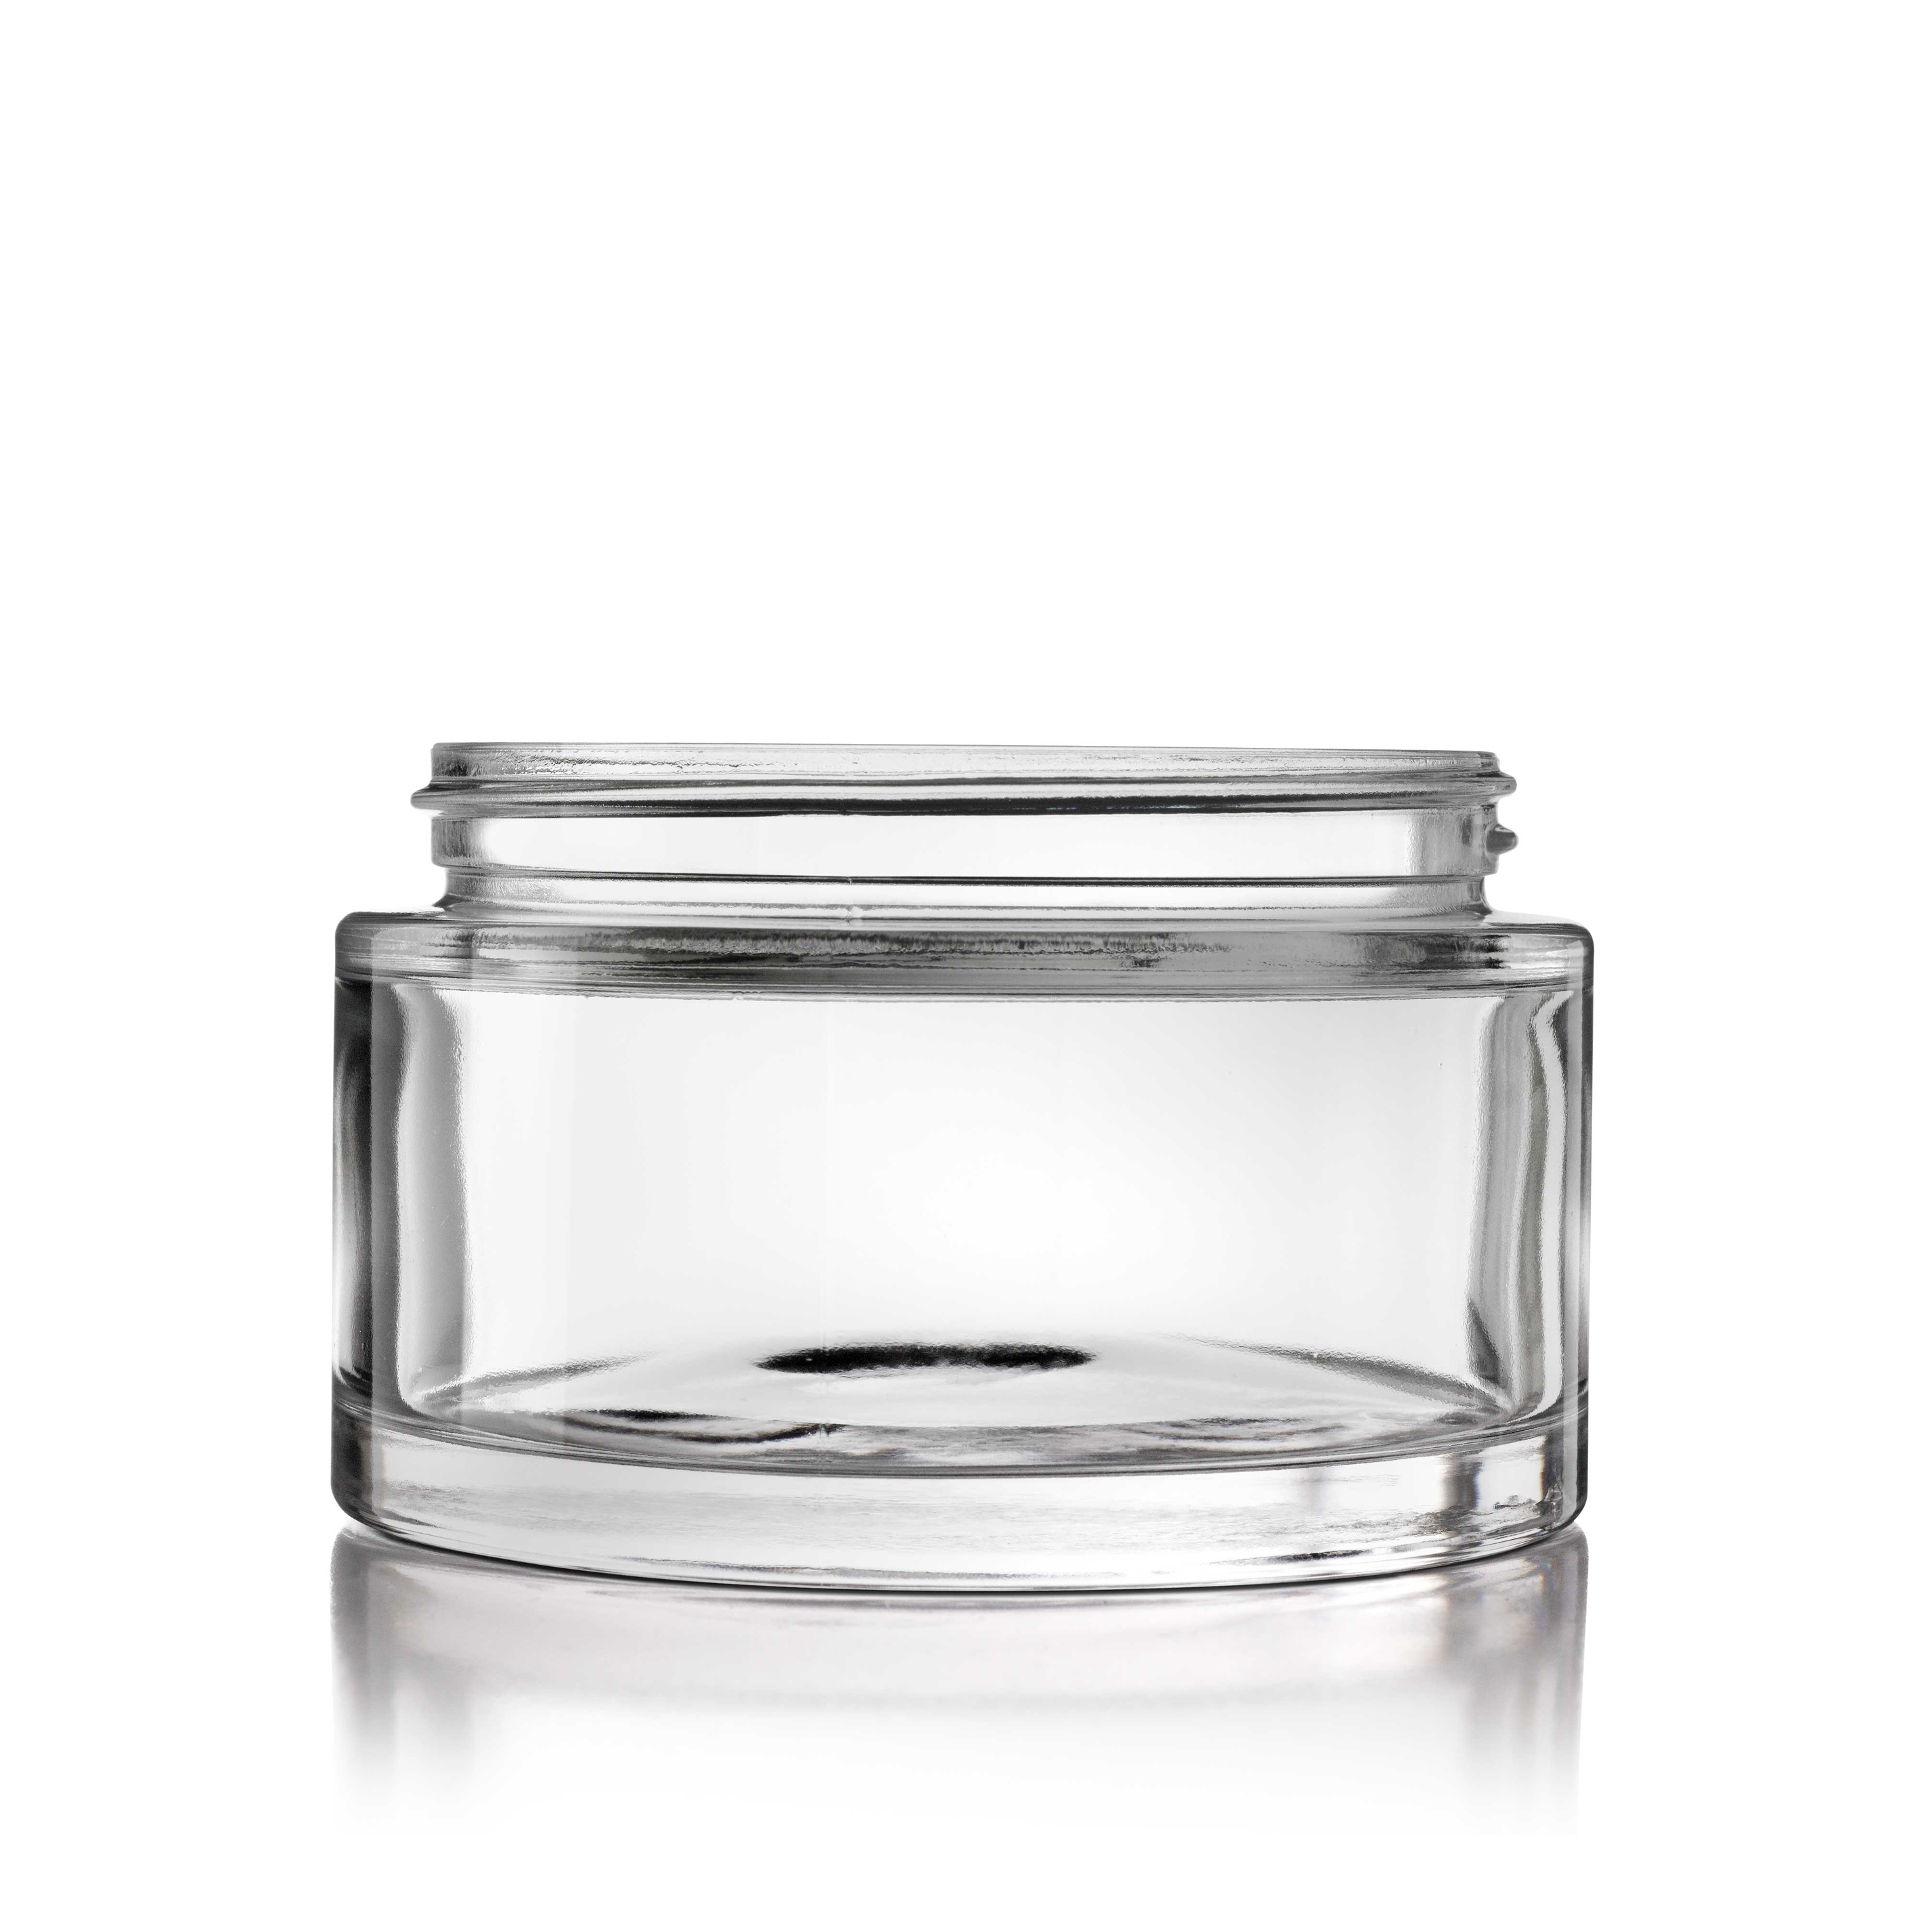 Cosmetic jar Camellia 240 ml, 85 special thread, fit for child-resistant lid, Flint